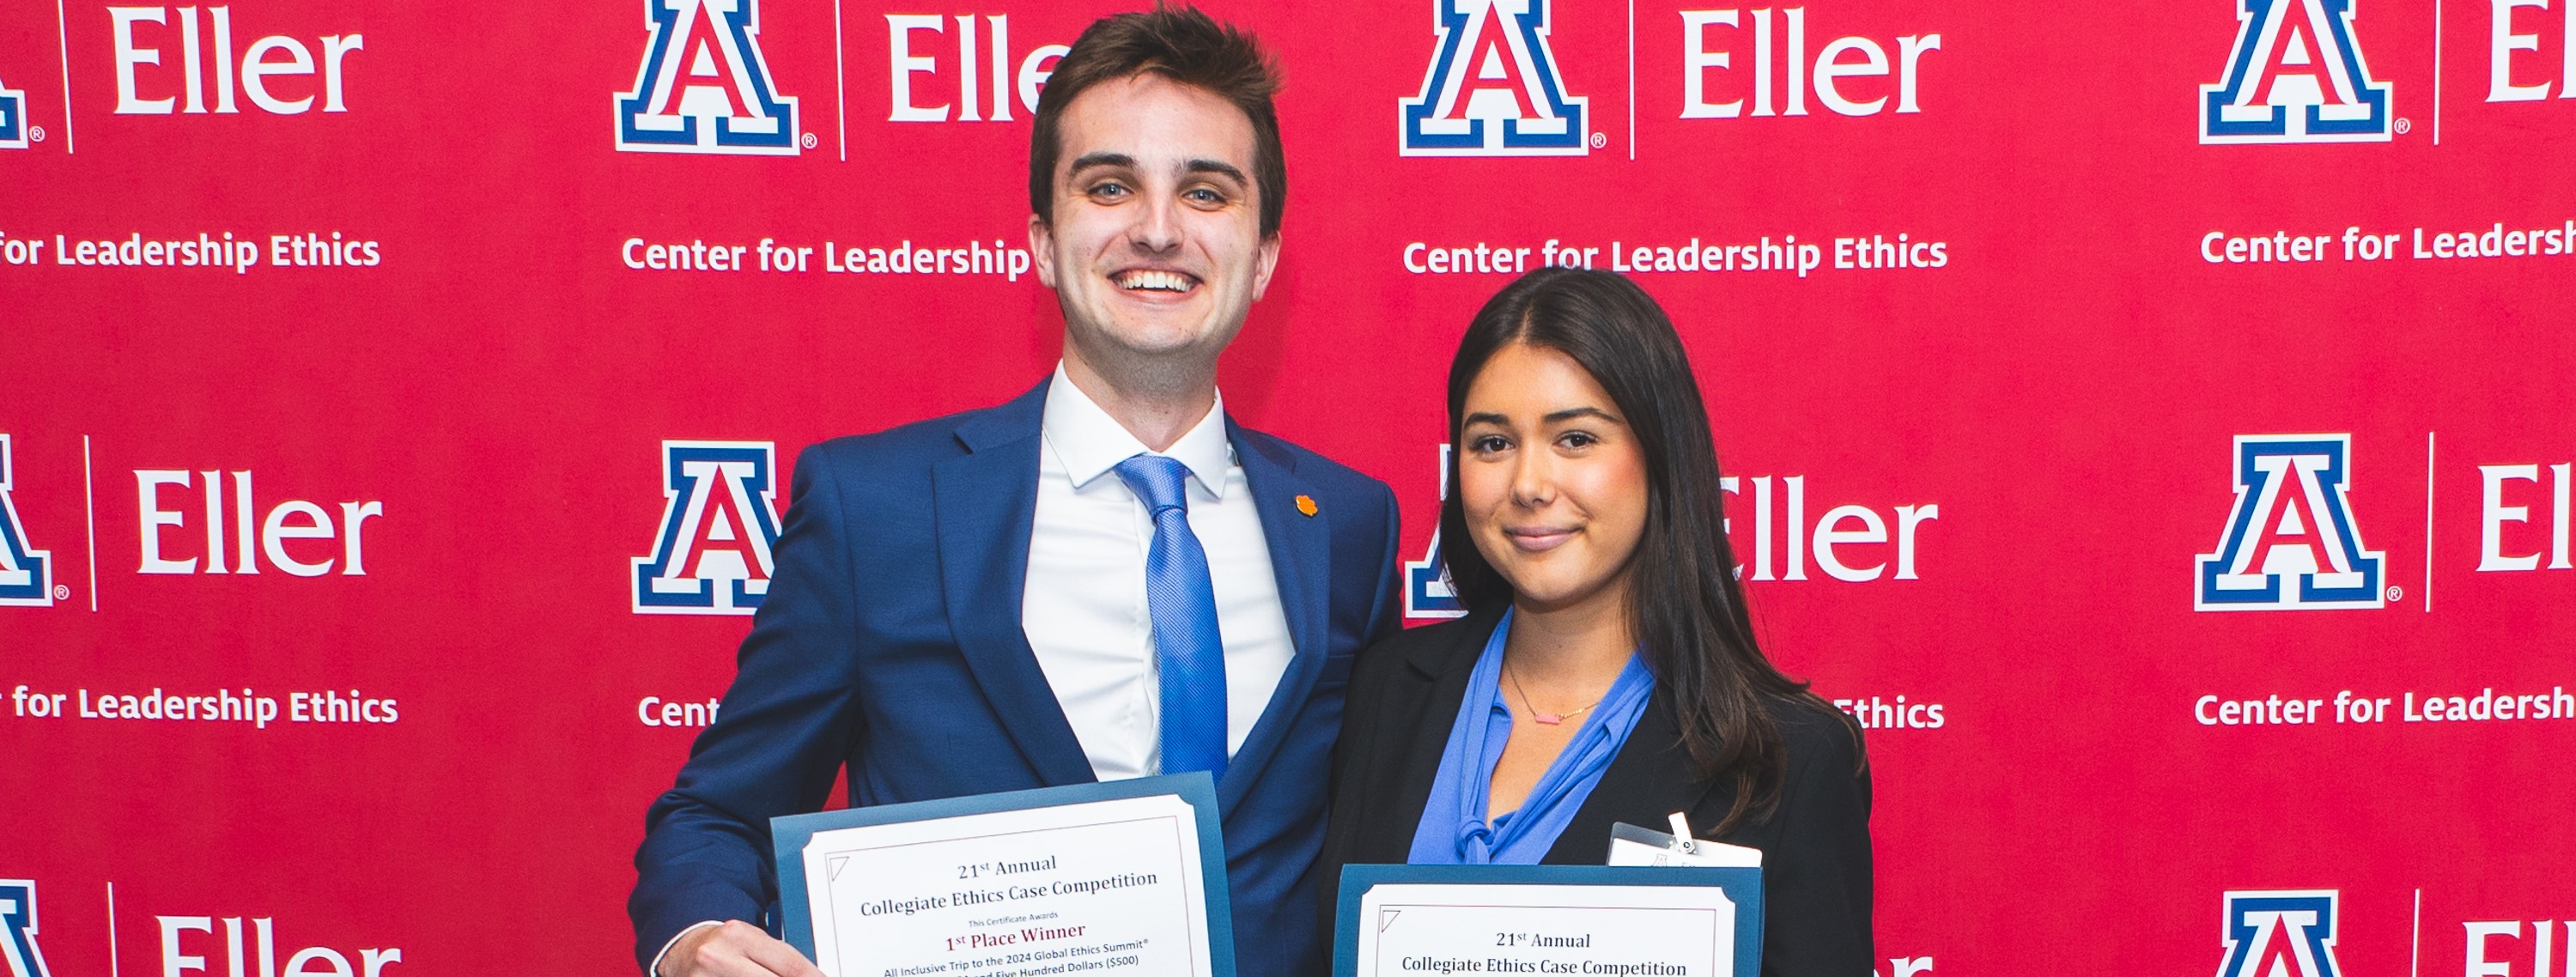 Pictures from the Eller International Case Competition 